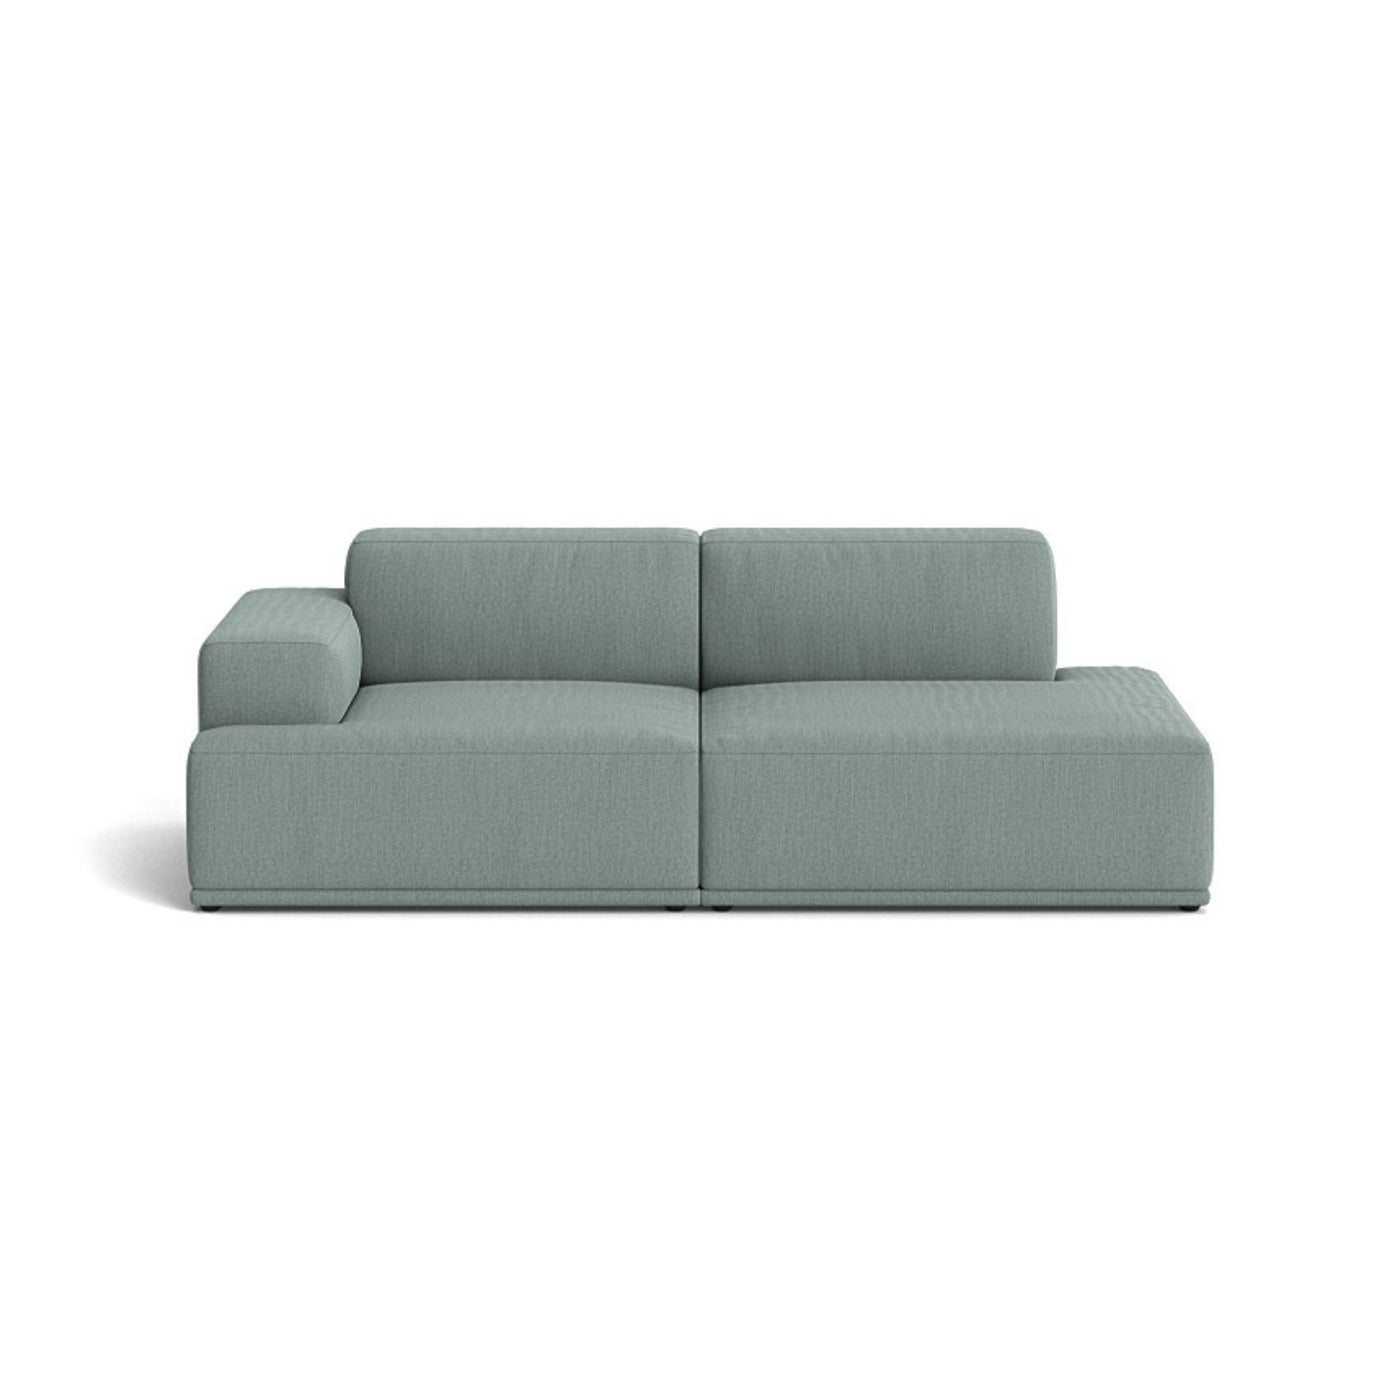 Muuto Connect Soft Modular 2 Seater Sofa, configuration 2. made-to-order from someday designs. #colour_re-wool-828